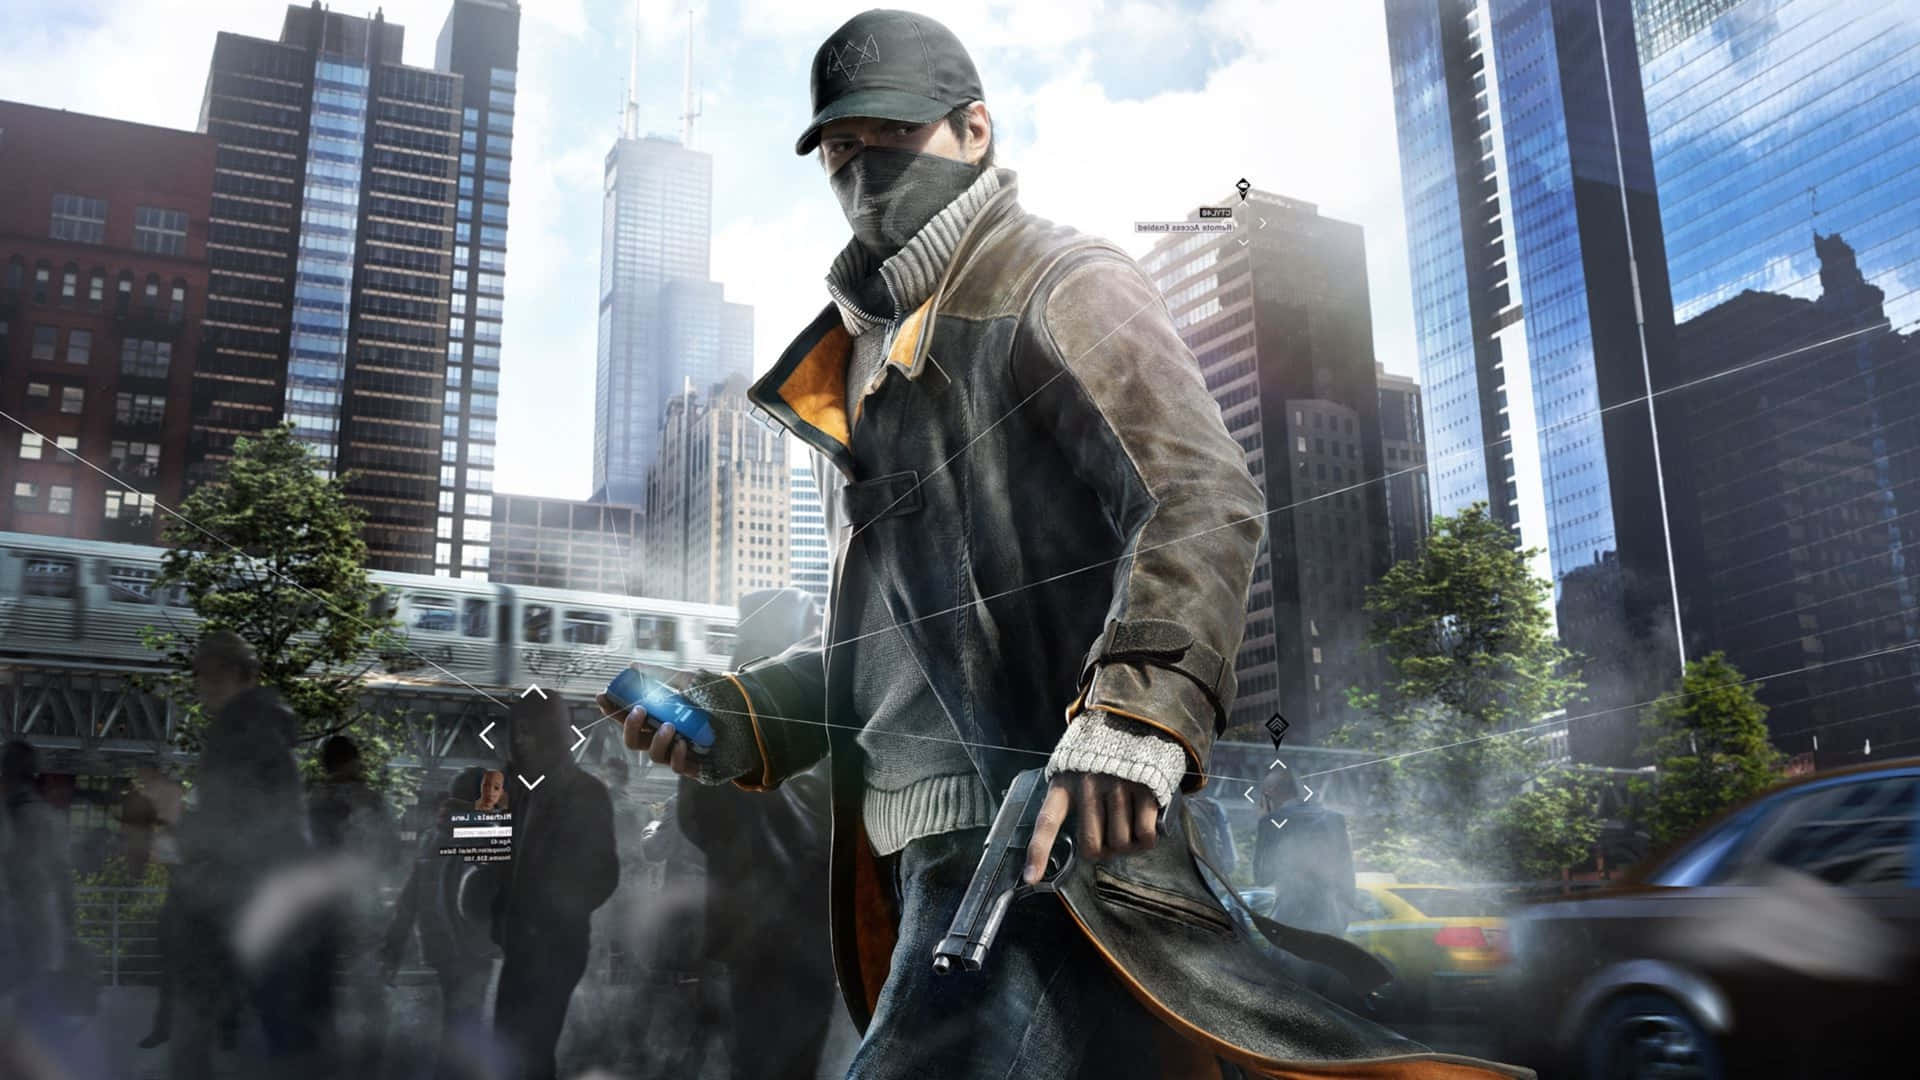 Wallpaper the sky, the city, home, mask, glasses, cap, guy, Ubisoft,  hacker, Marcus, Watch Dogs 2, Marcus images for desktop, section игры -  download